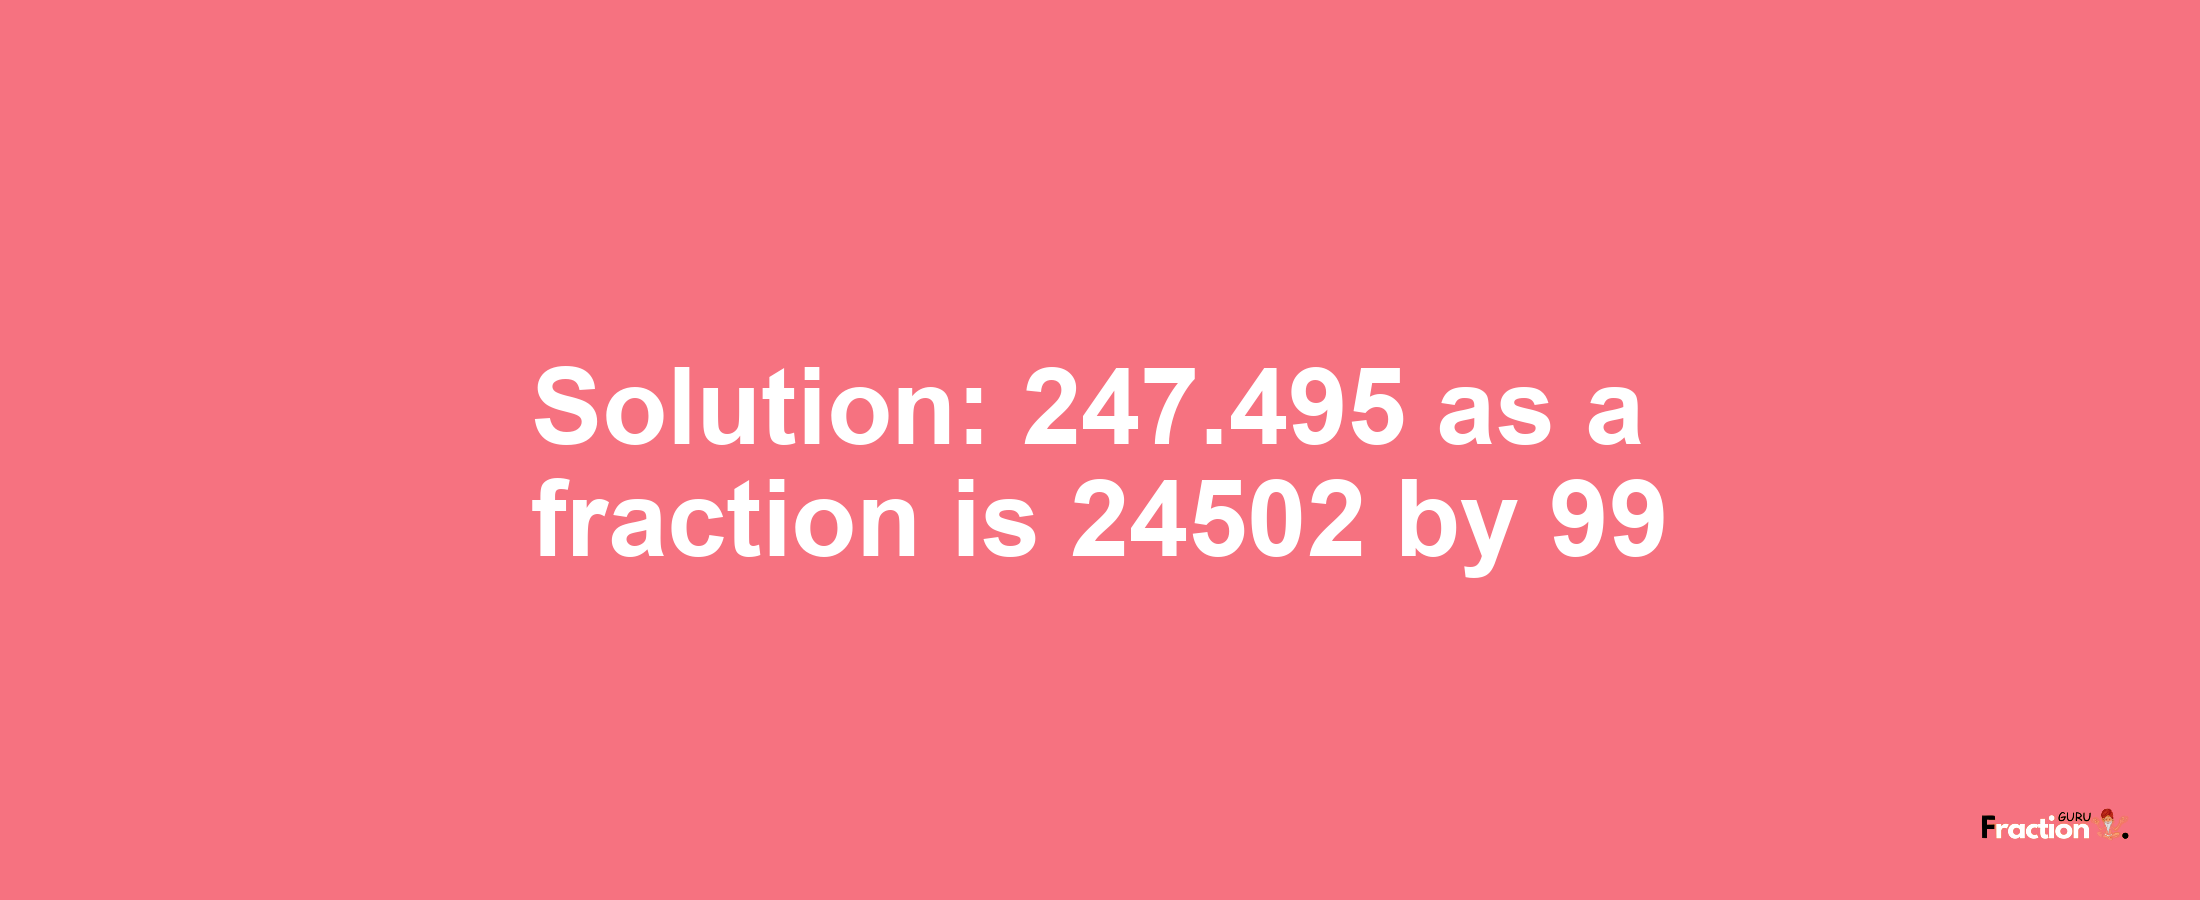 Solution:247.495 as a fraction is 24502/99